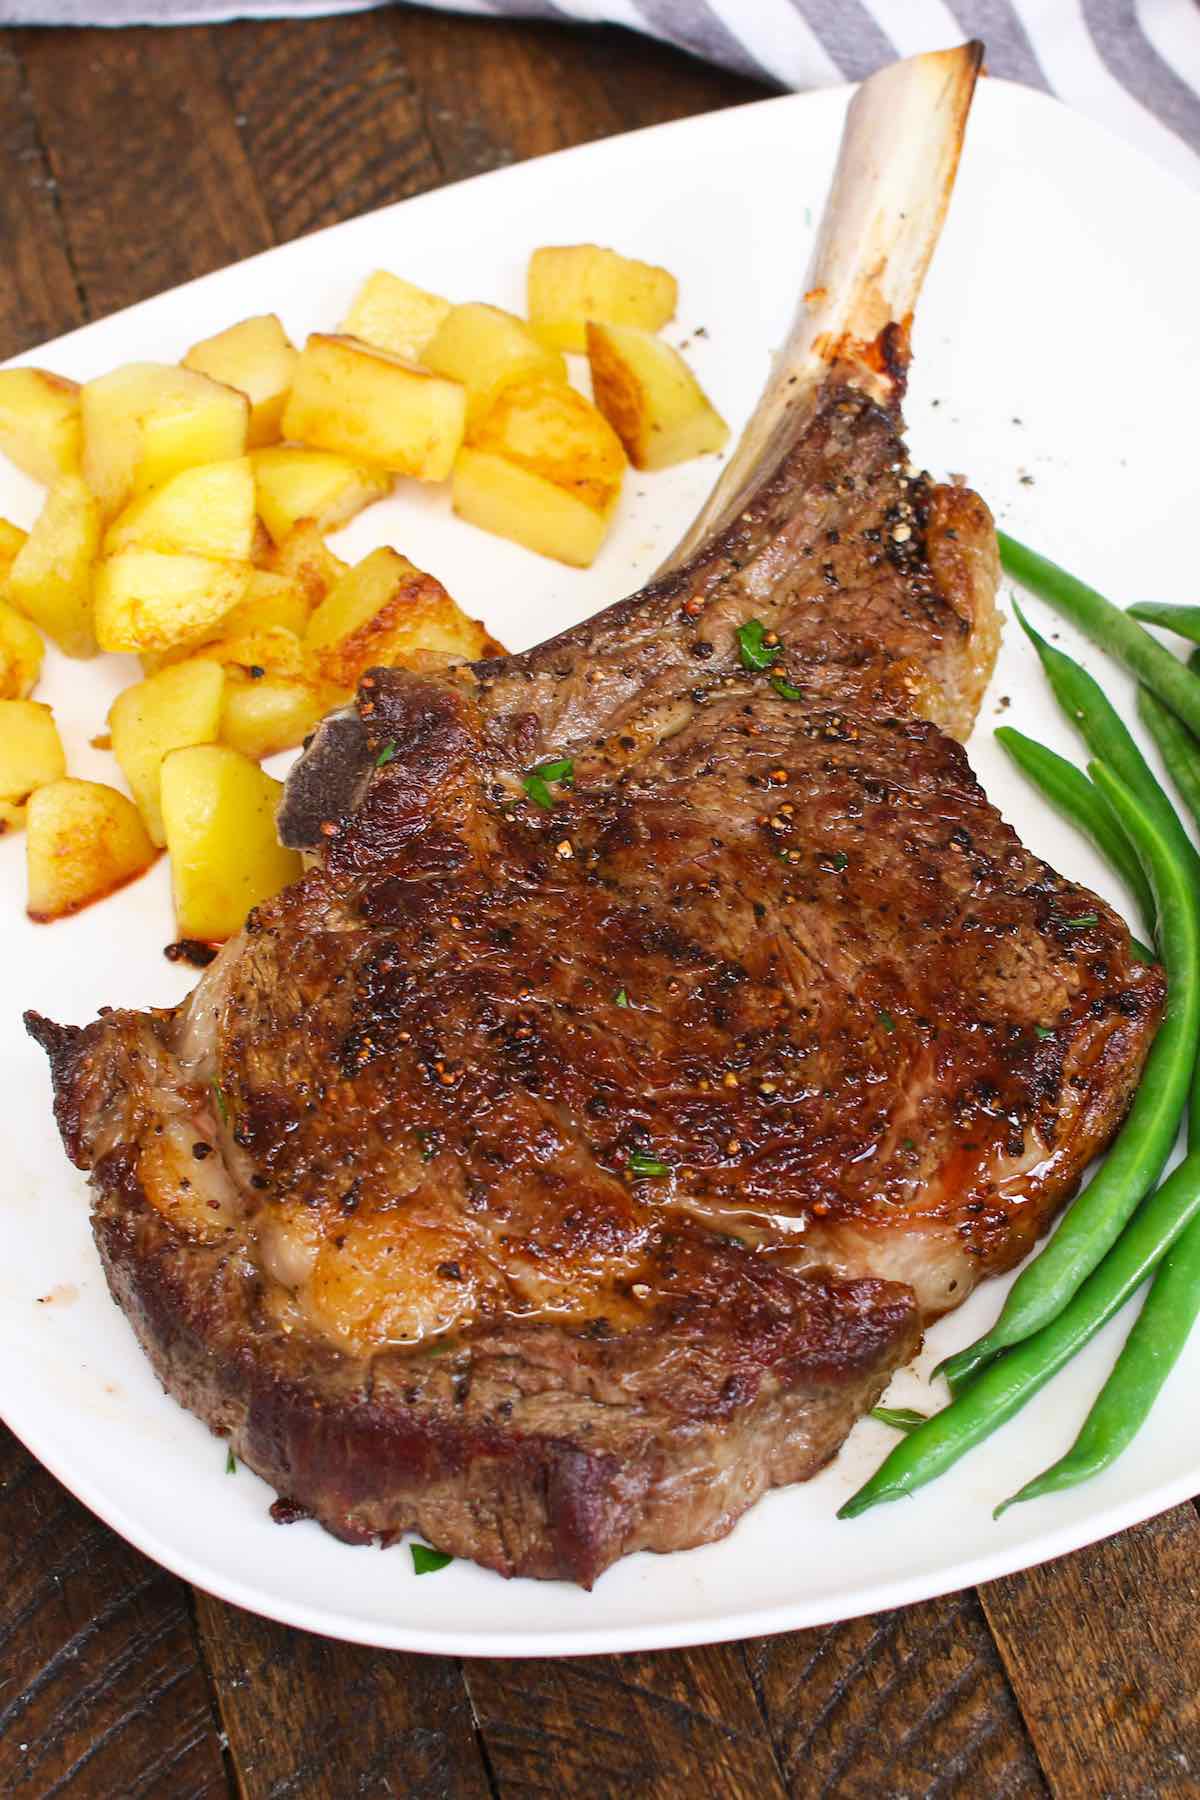 Cowboy steak cooked in the oven and served with green beans and sauteed potatoes for a delicious steak dinner